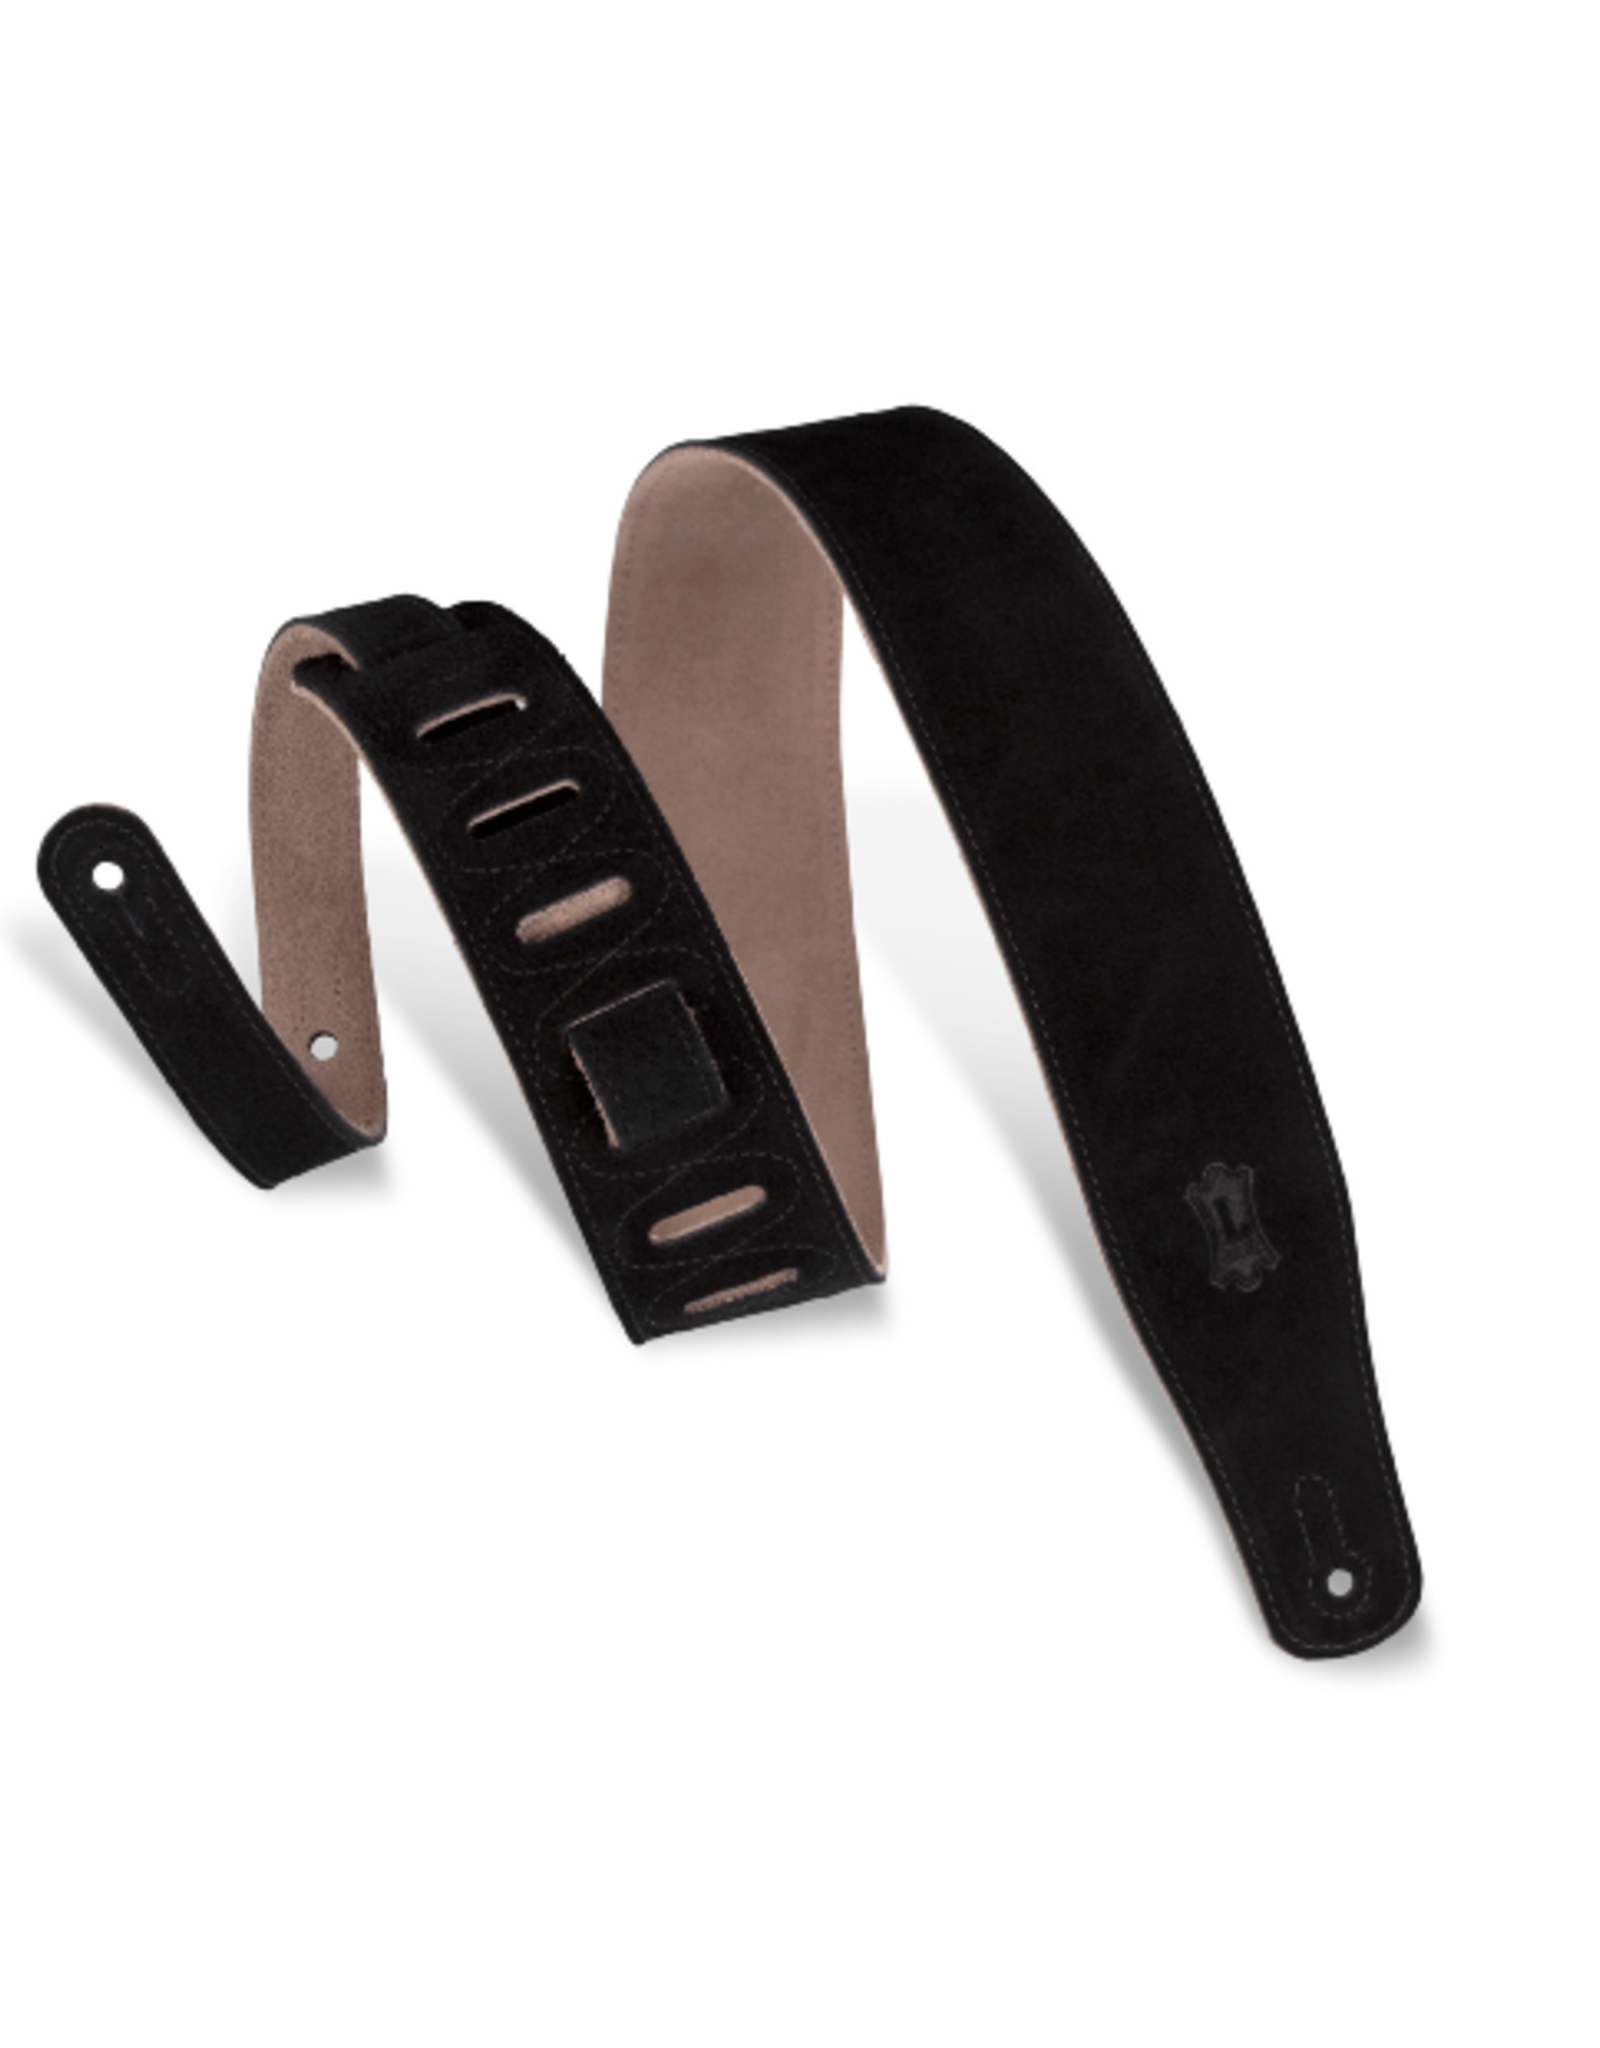 Levy's Levy's CLASSICS SERIES Suede Guitar Strap Black